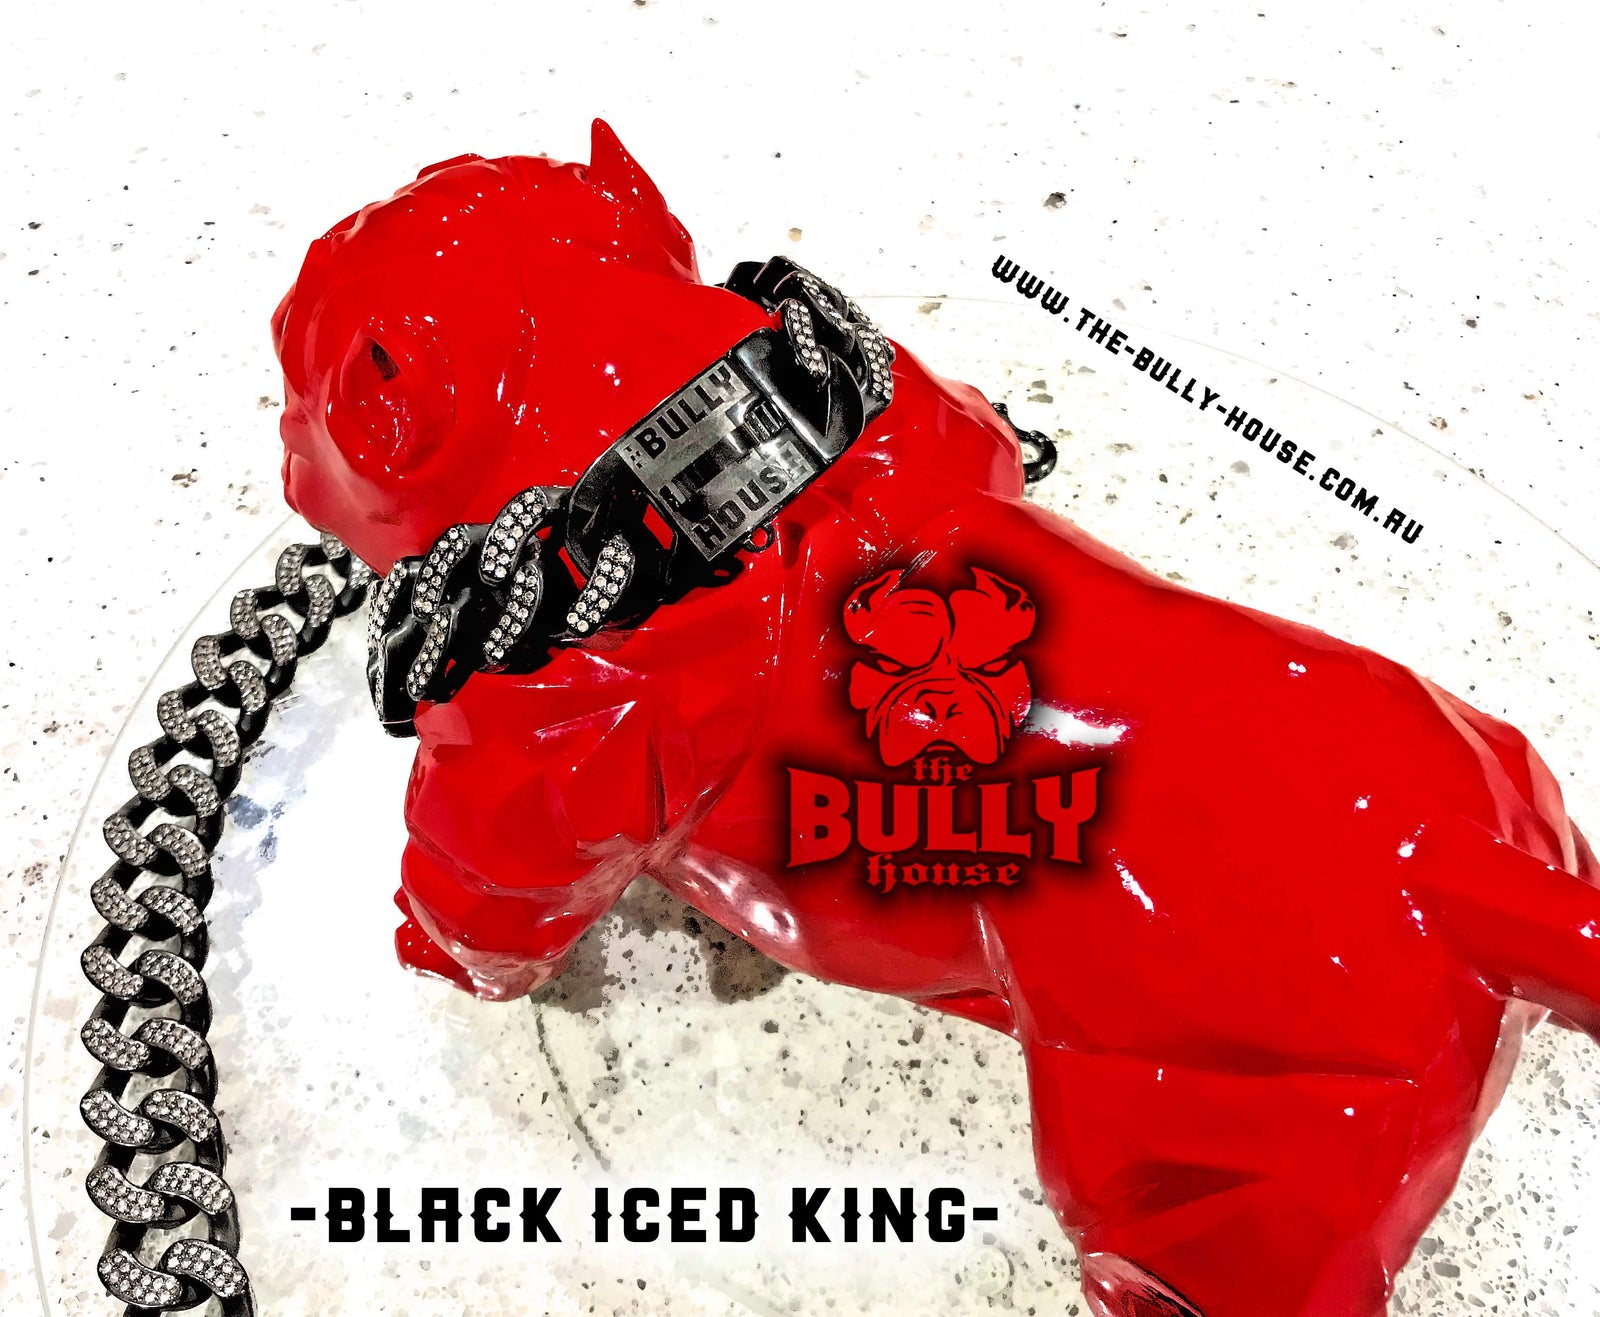 (Pre Order Now - Arriving approx end of DEC) The Bully House BLACK ICED OUT KING Diamond Collection" - (Free Post in Aust)